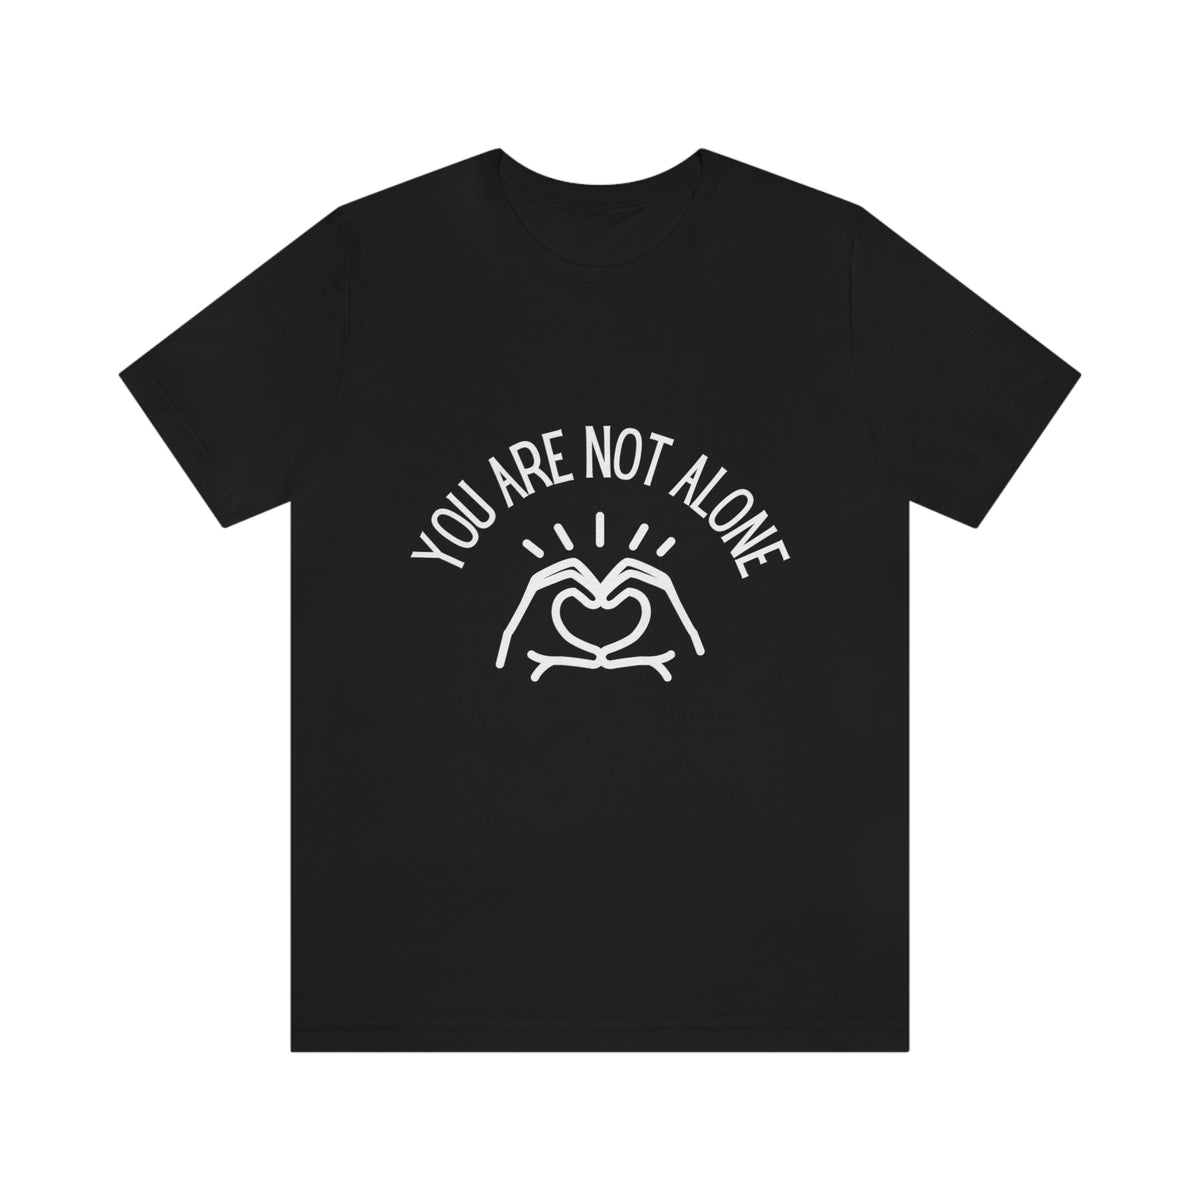 “You Are Not Alone” Unisex Jersey Short Sleeve Tee - Fck the Stigma